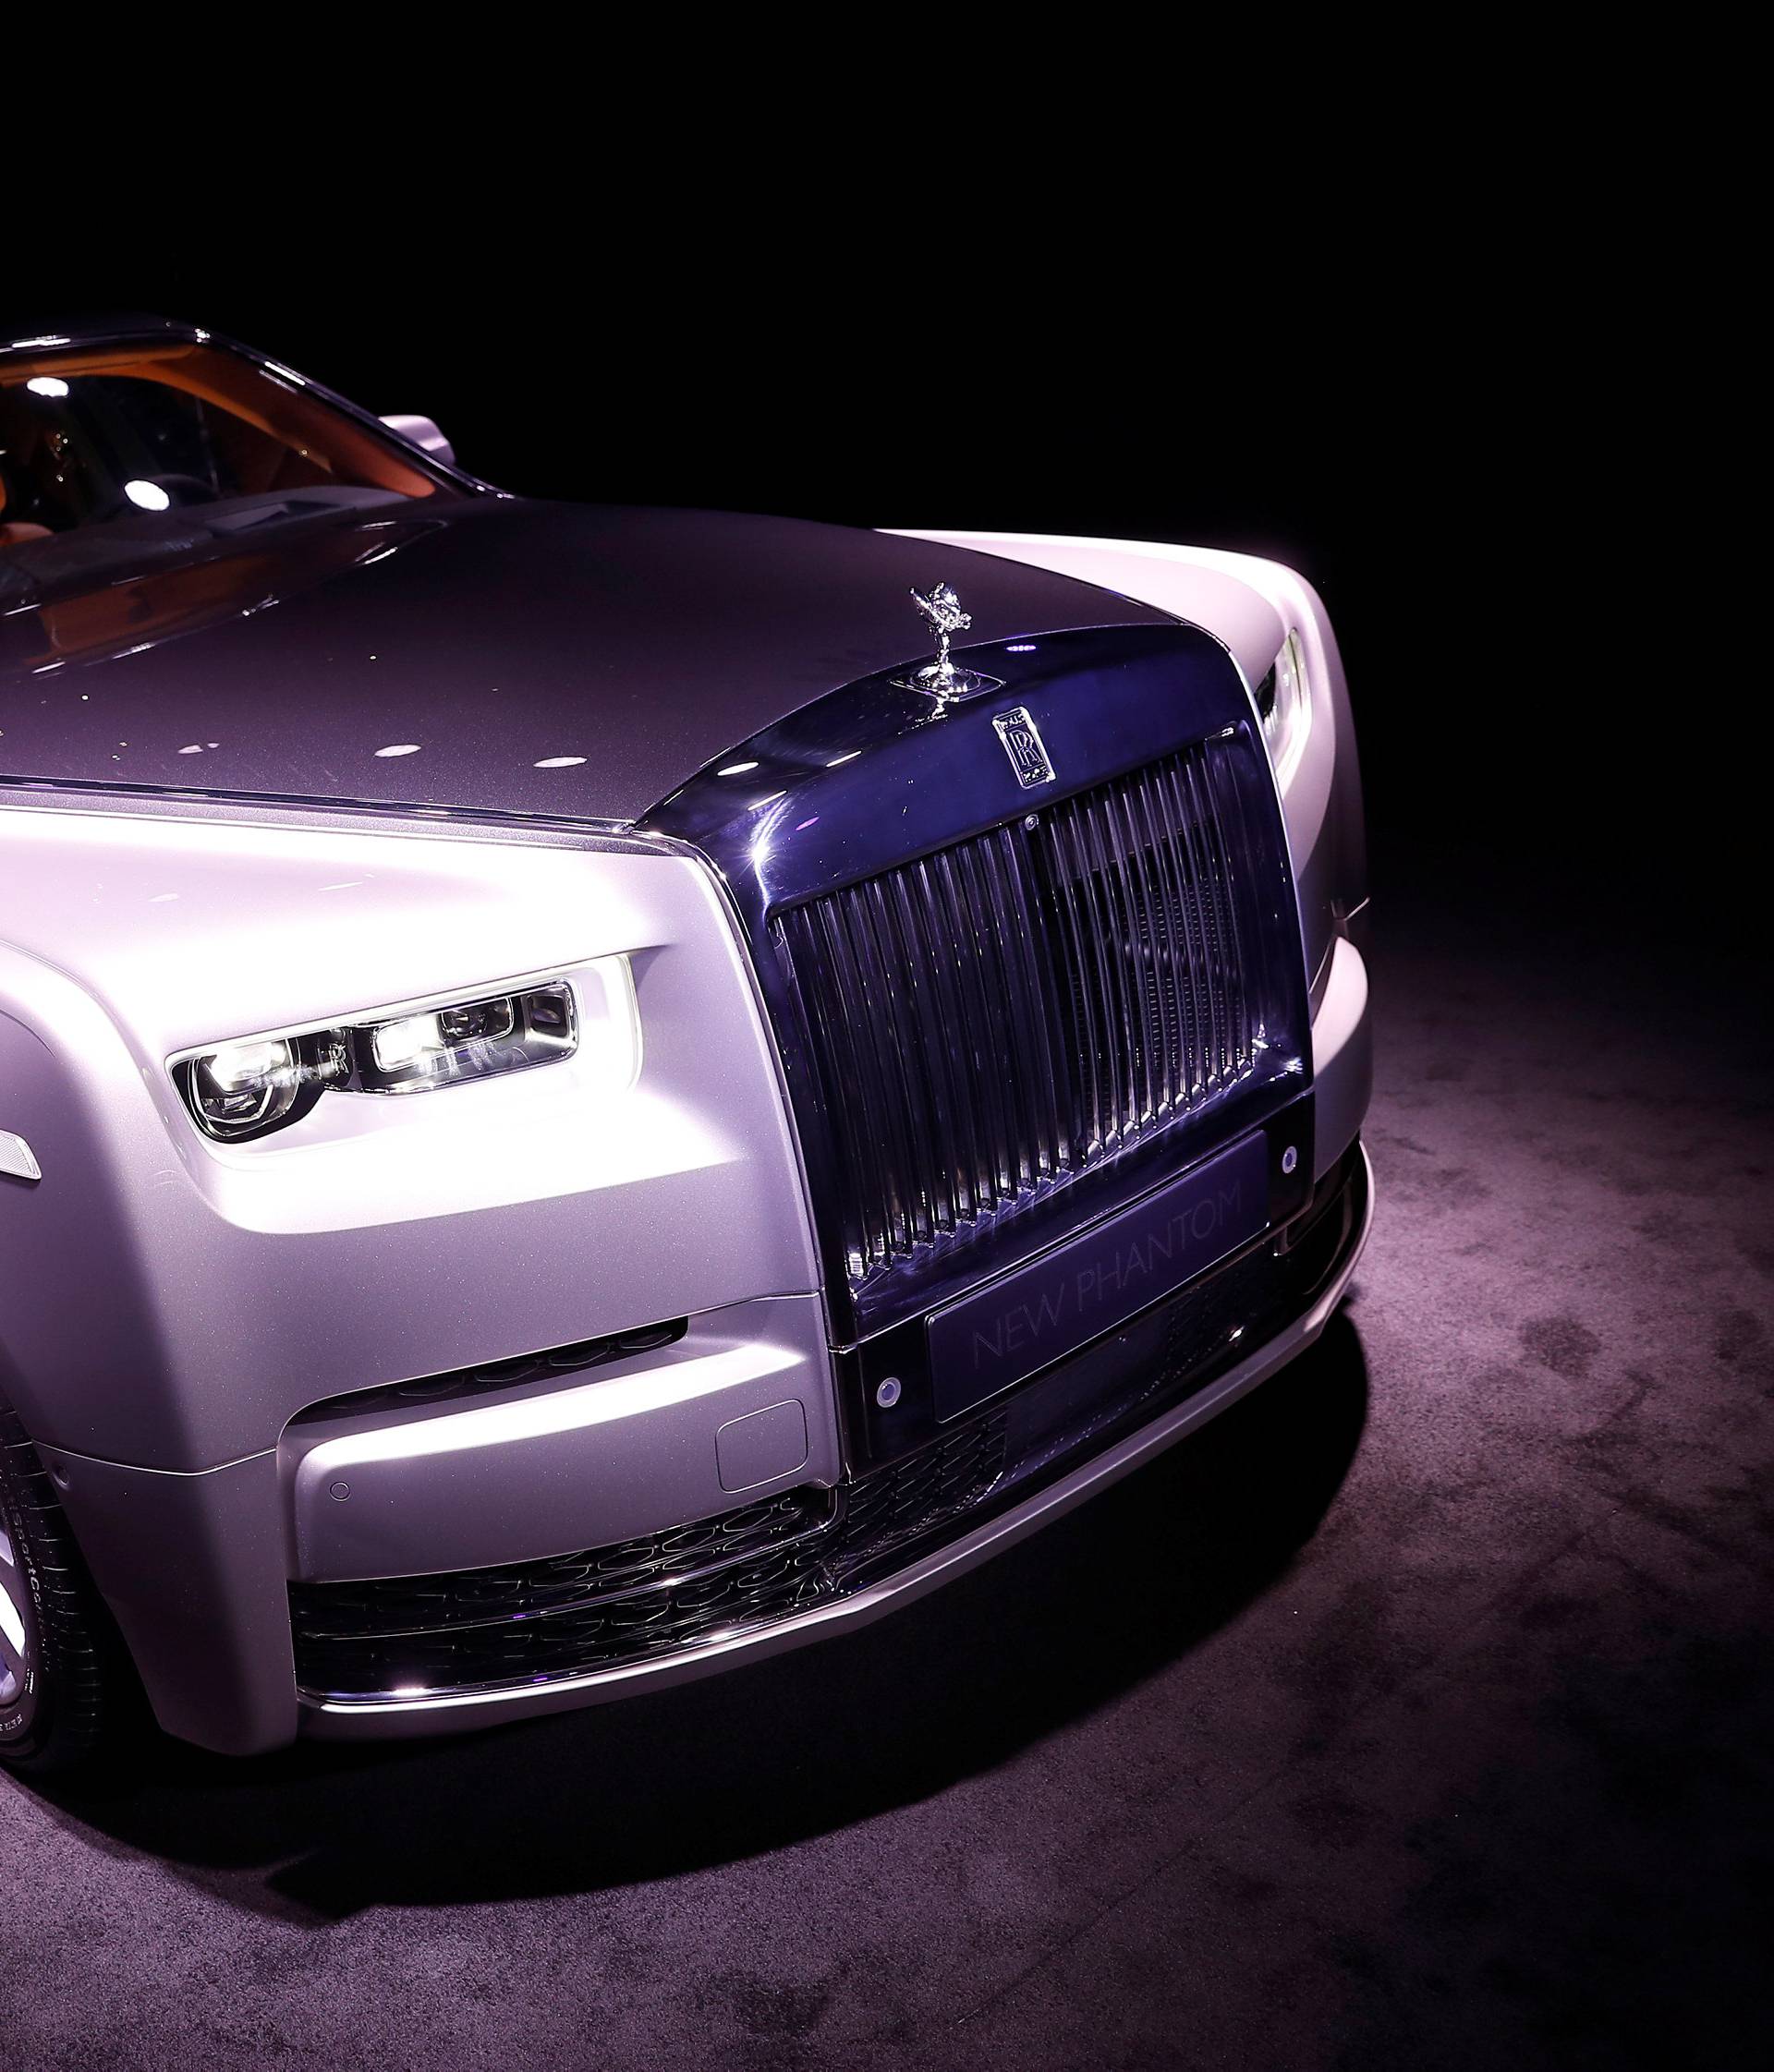 The new Rolls-Royce Phantom is premiered at an event at Bonhams and in conjunction with an exhibition of previous models of the car, in London